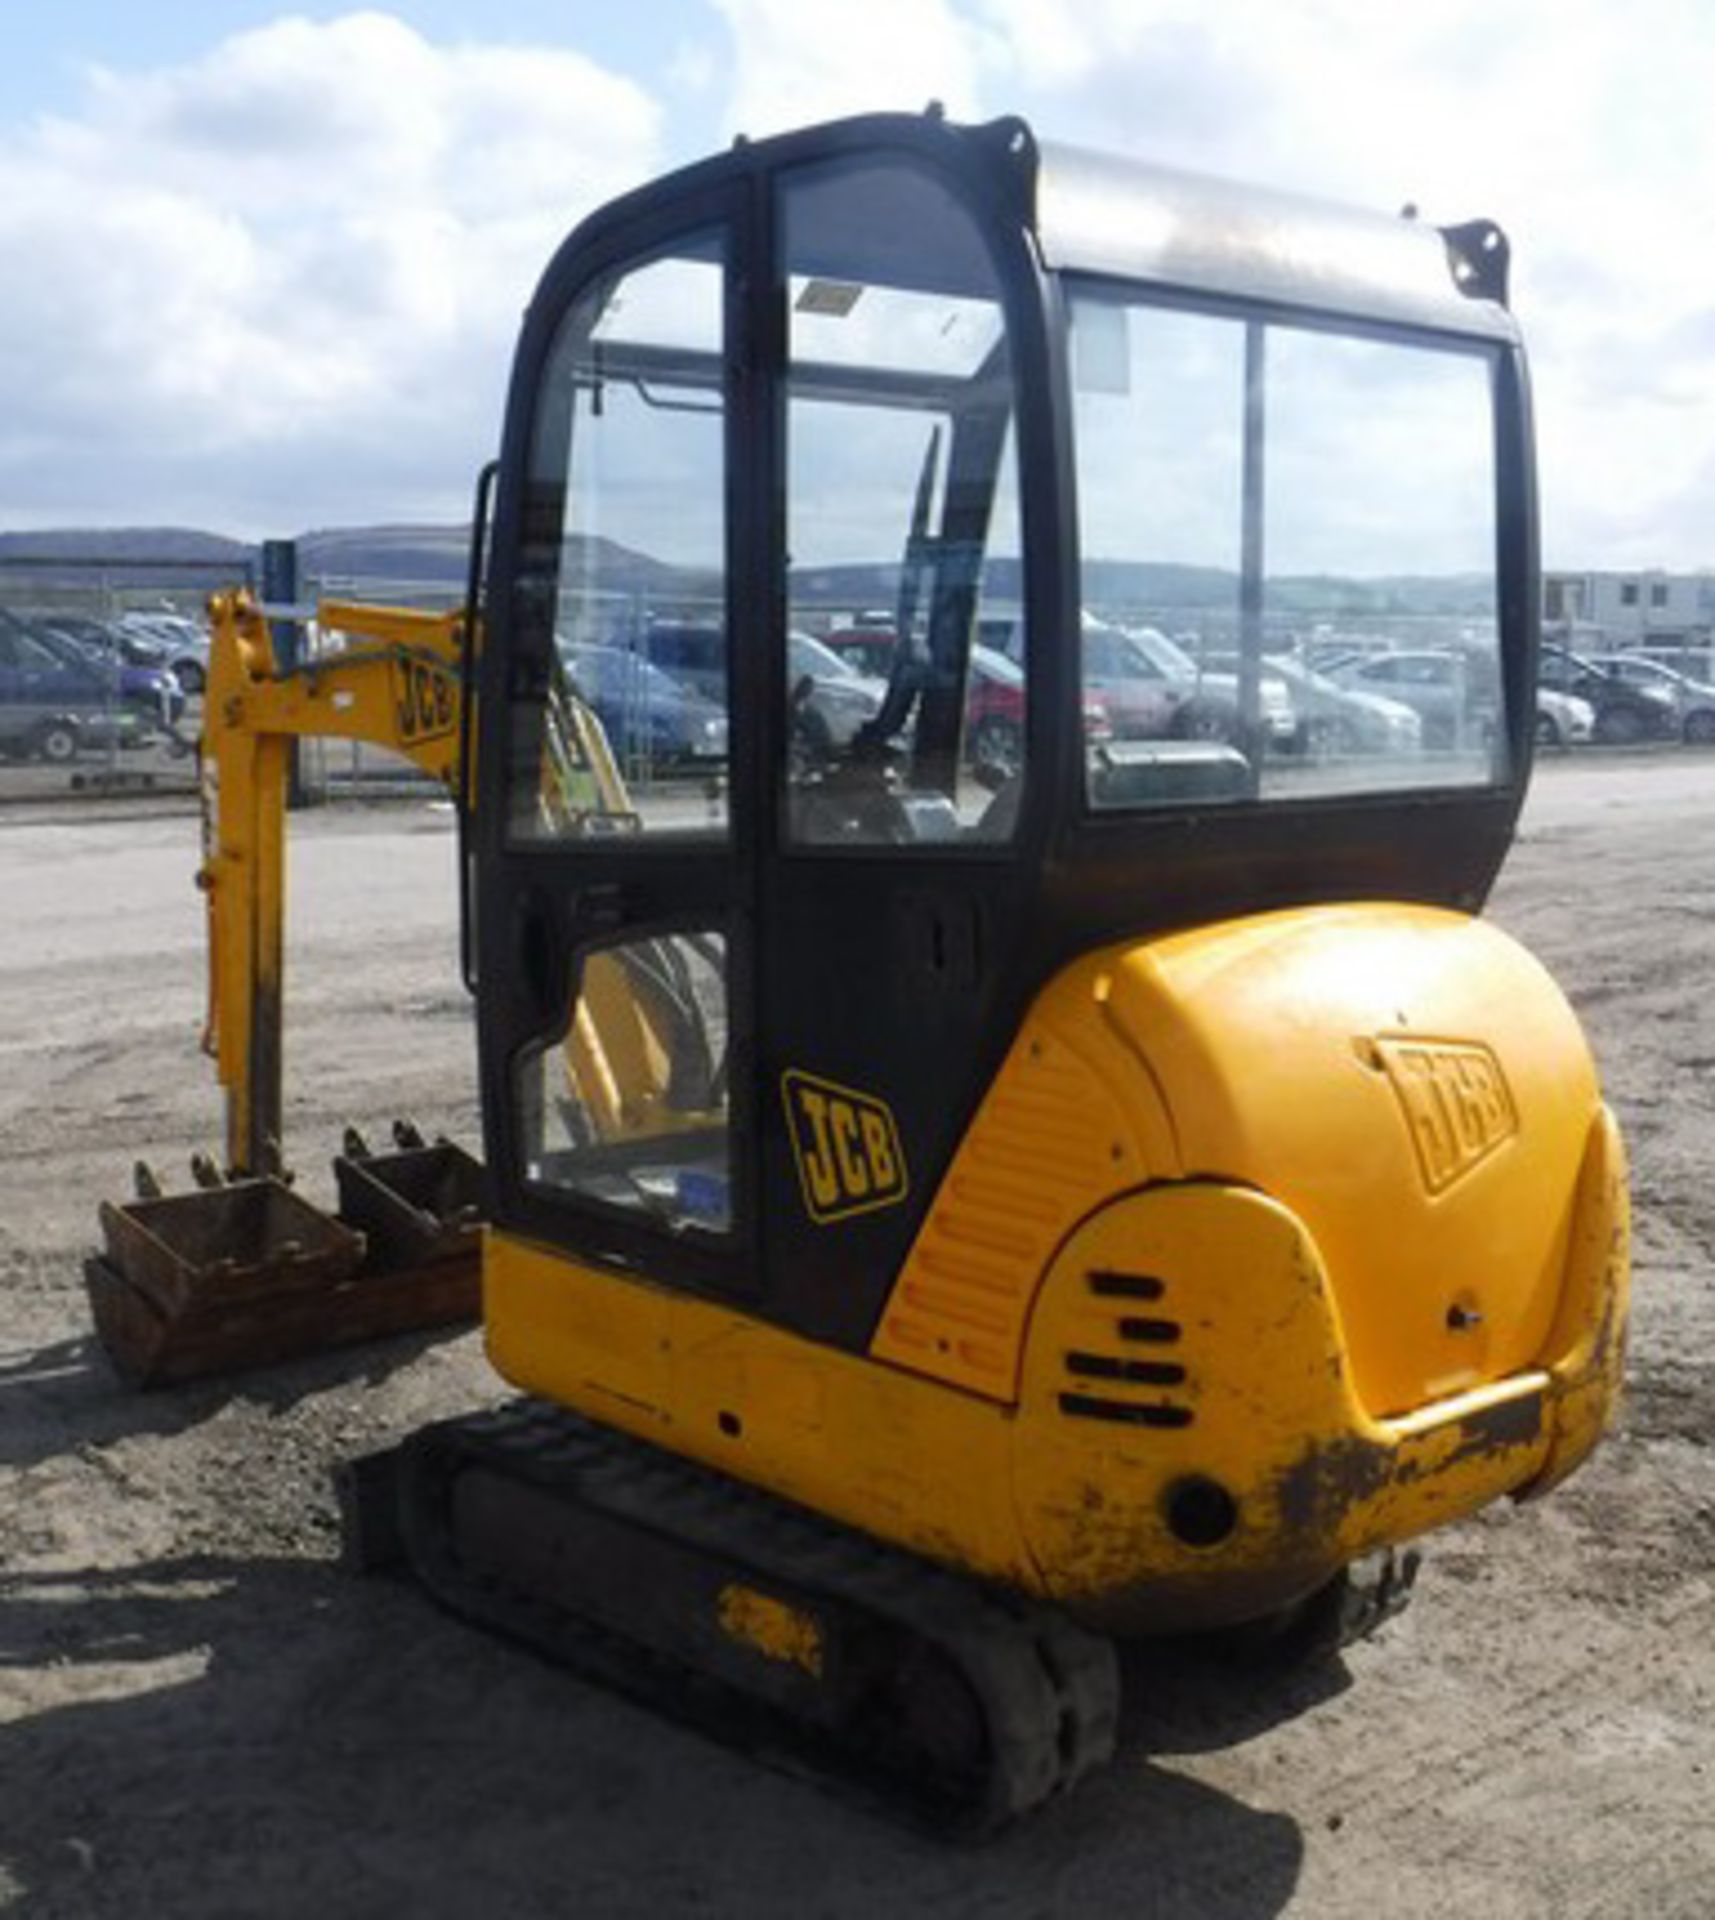 2005 JCB 801.5, S/N 175261M, 2261HRS (NOT VERFIED), C/W 3 BUCKETS, IMMOBILISER & 2 KEY FOBS - Image 15 of 17